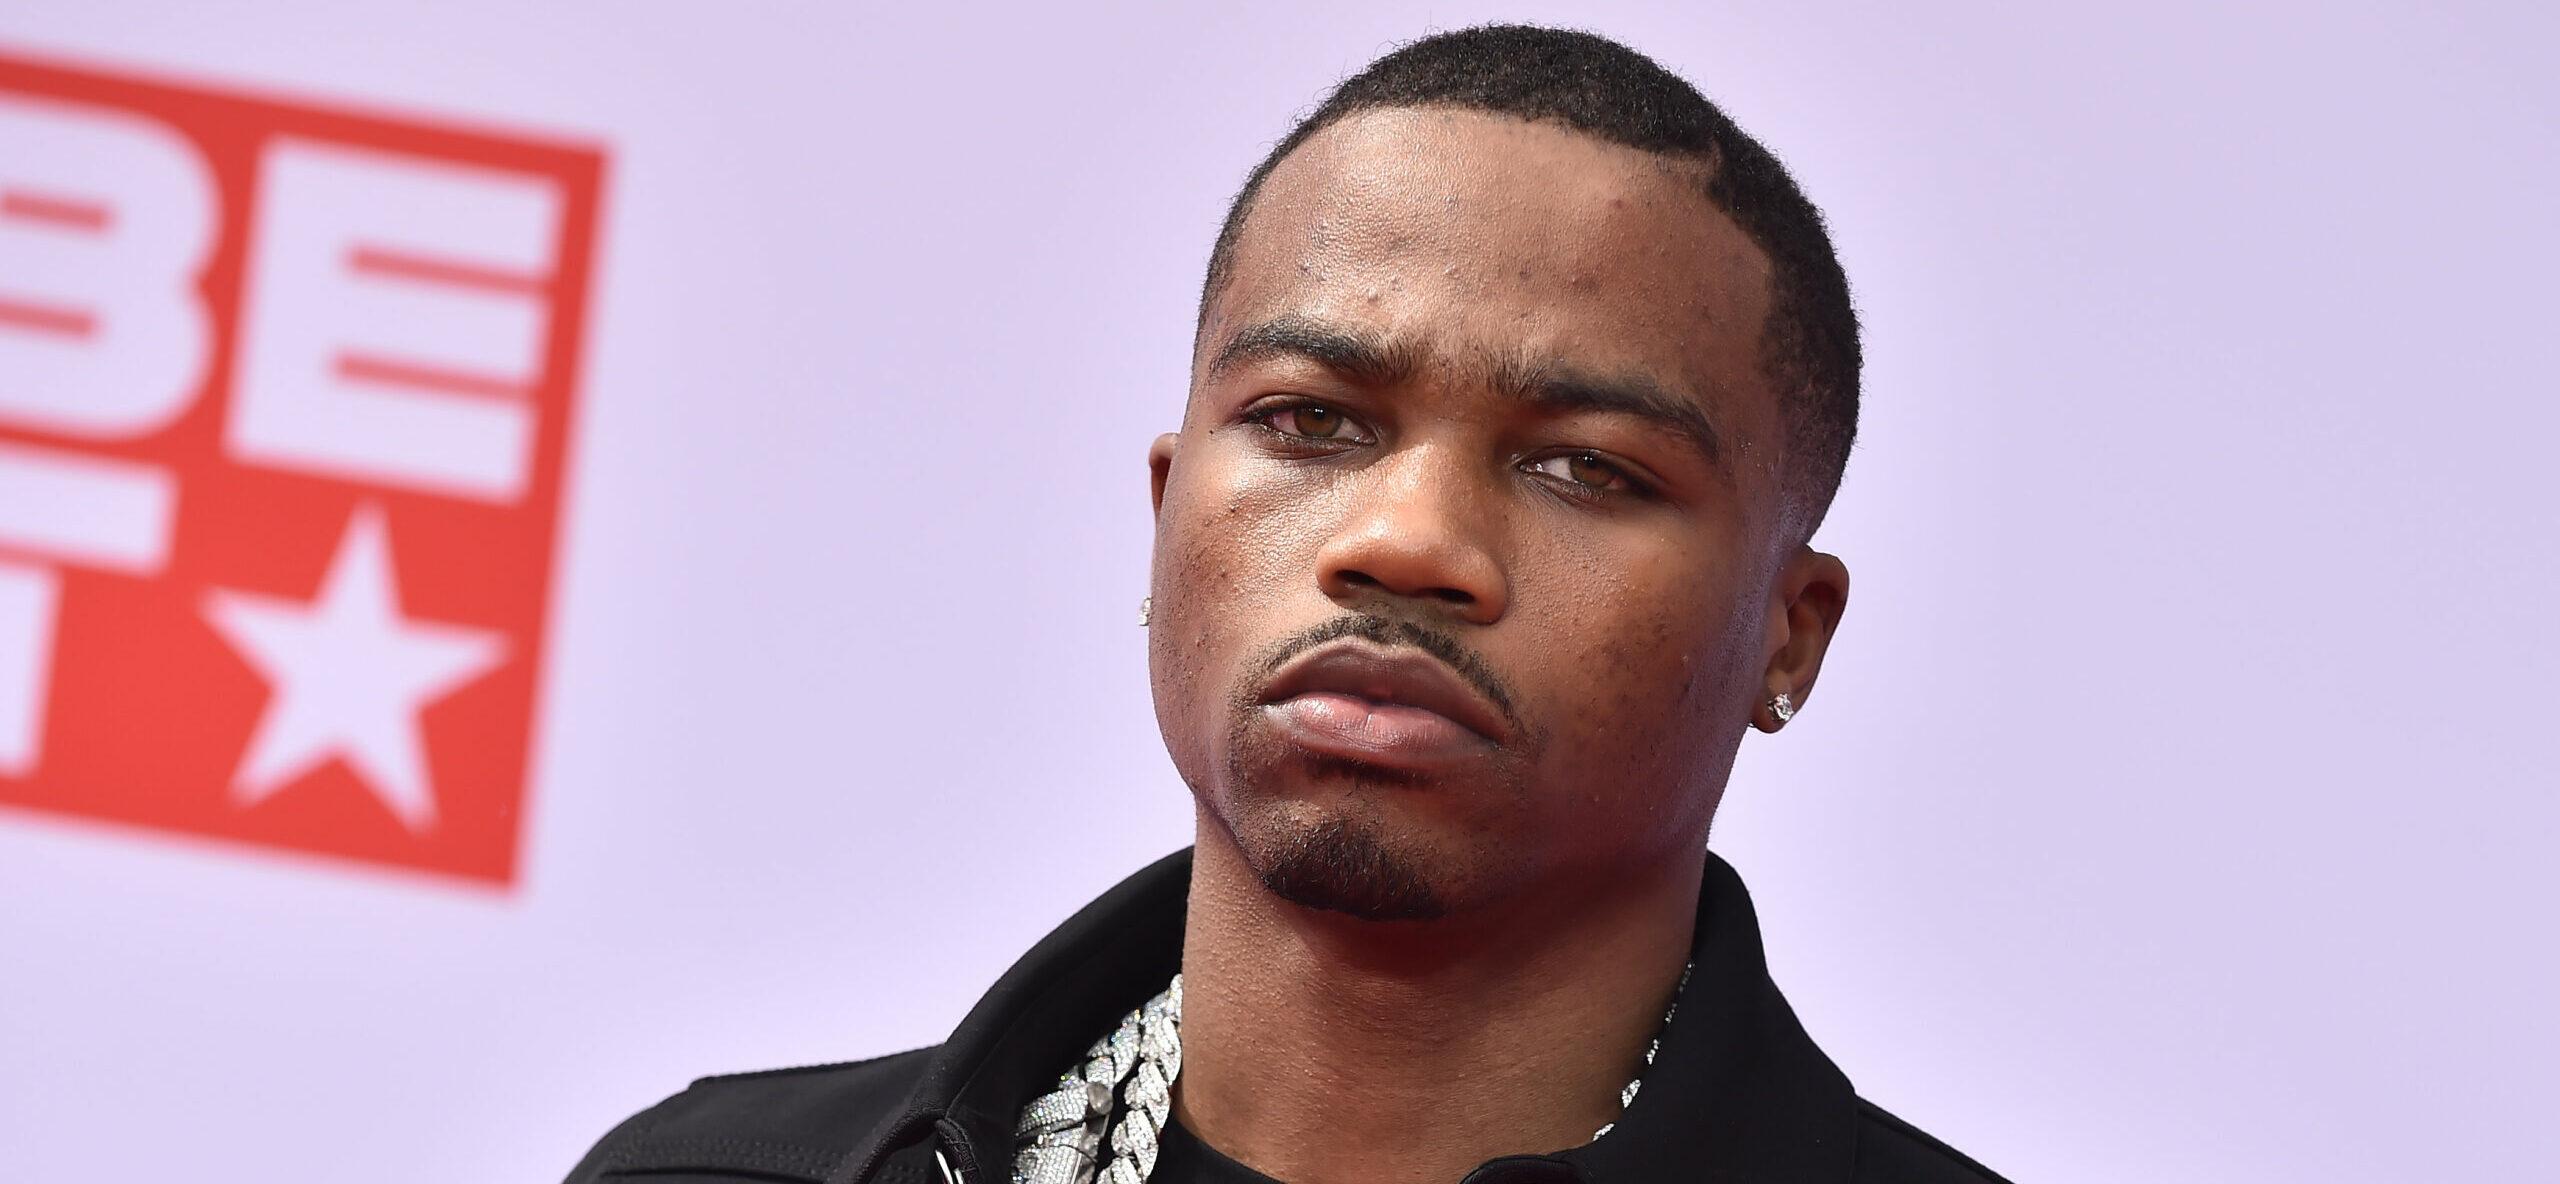 Roddy Ricch Screams ‘F-ck NYPD’ After Dismissal Of Gun Charges And Release From Jail